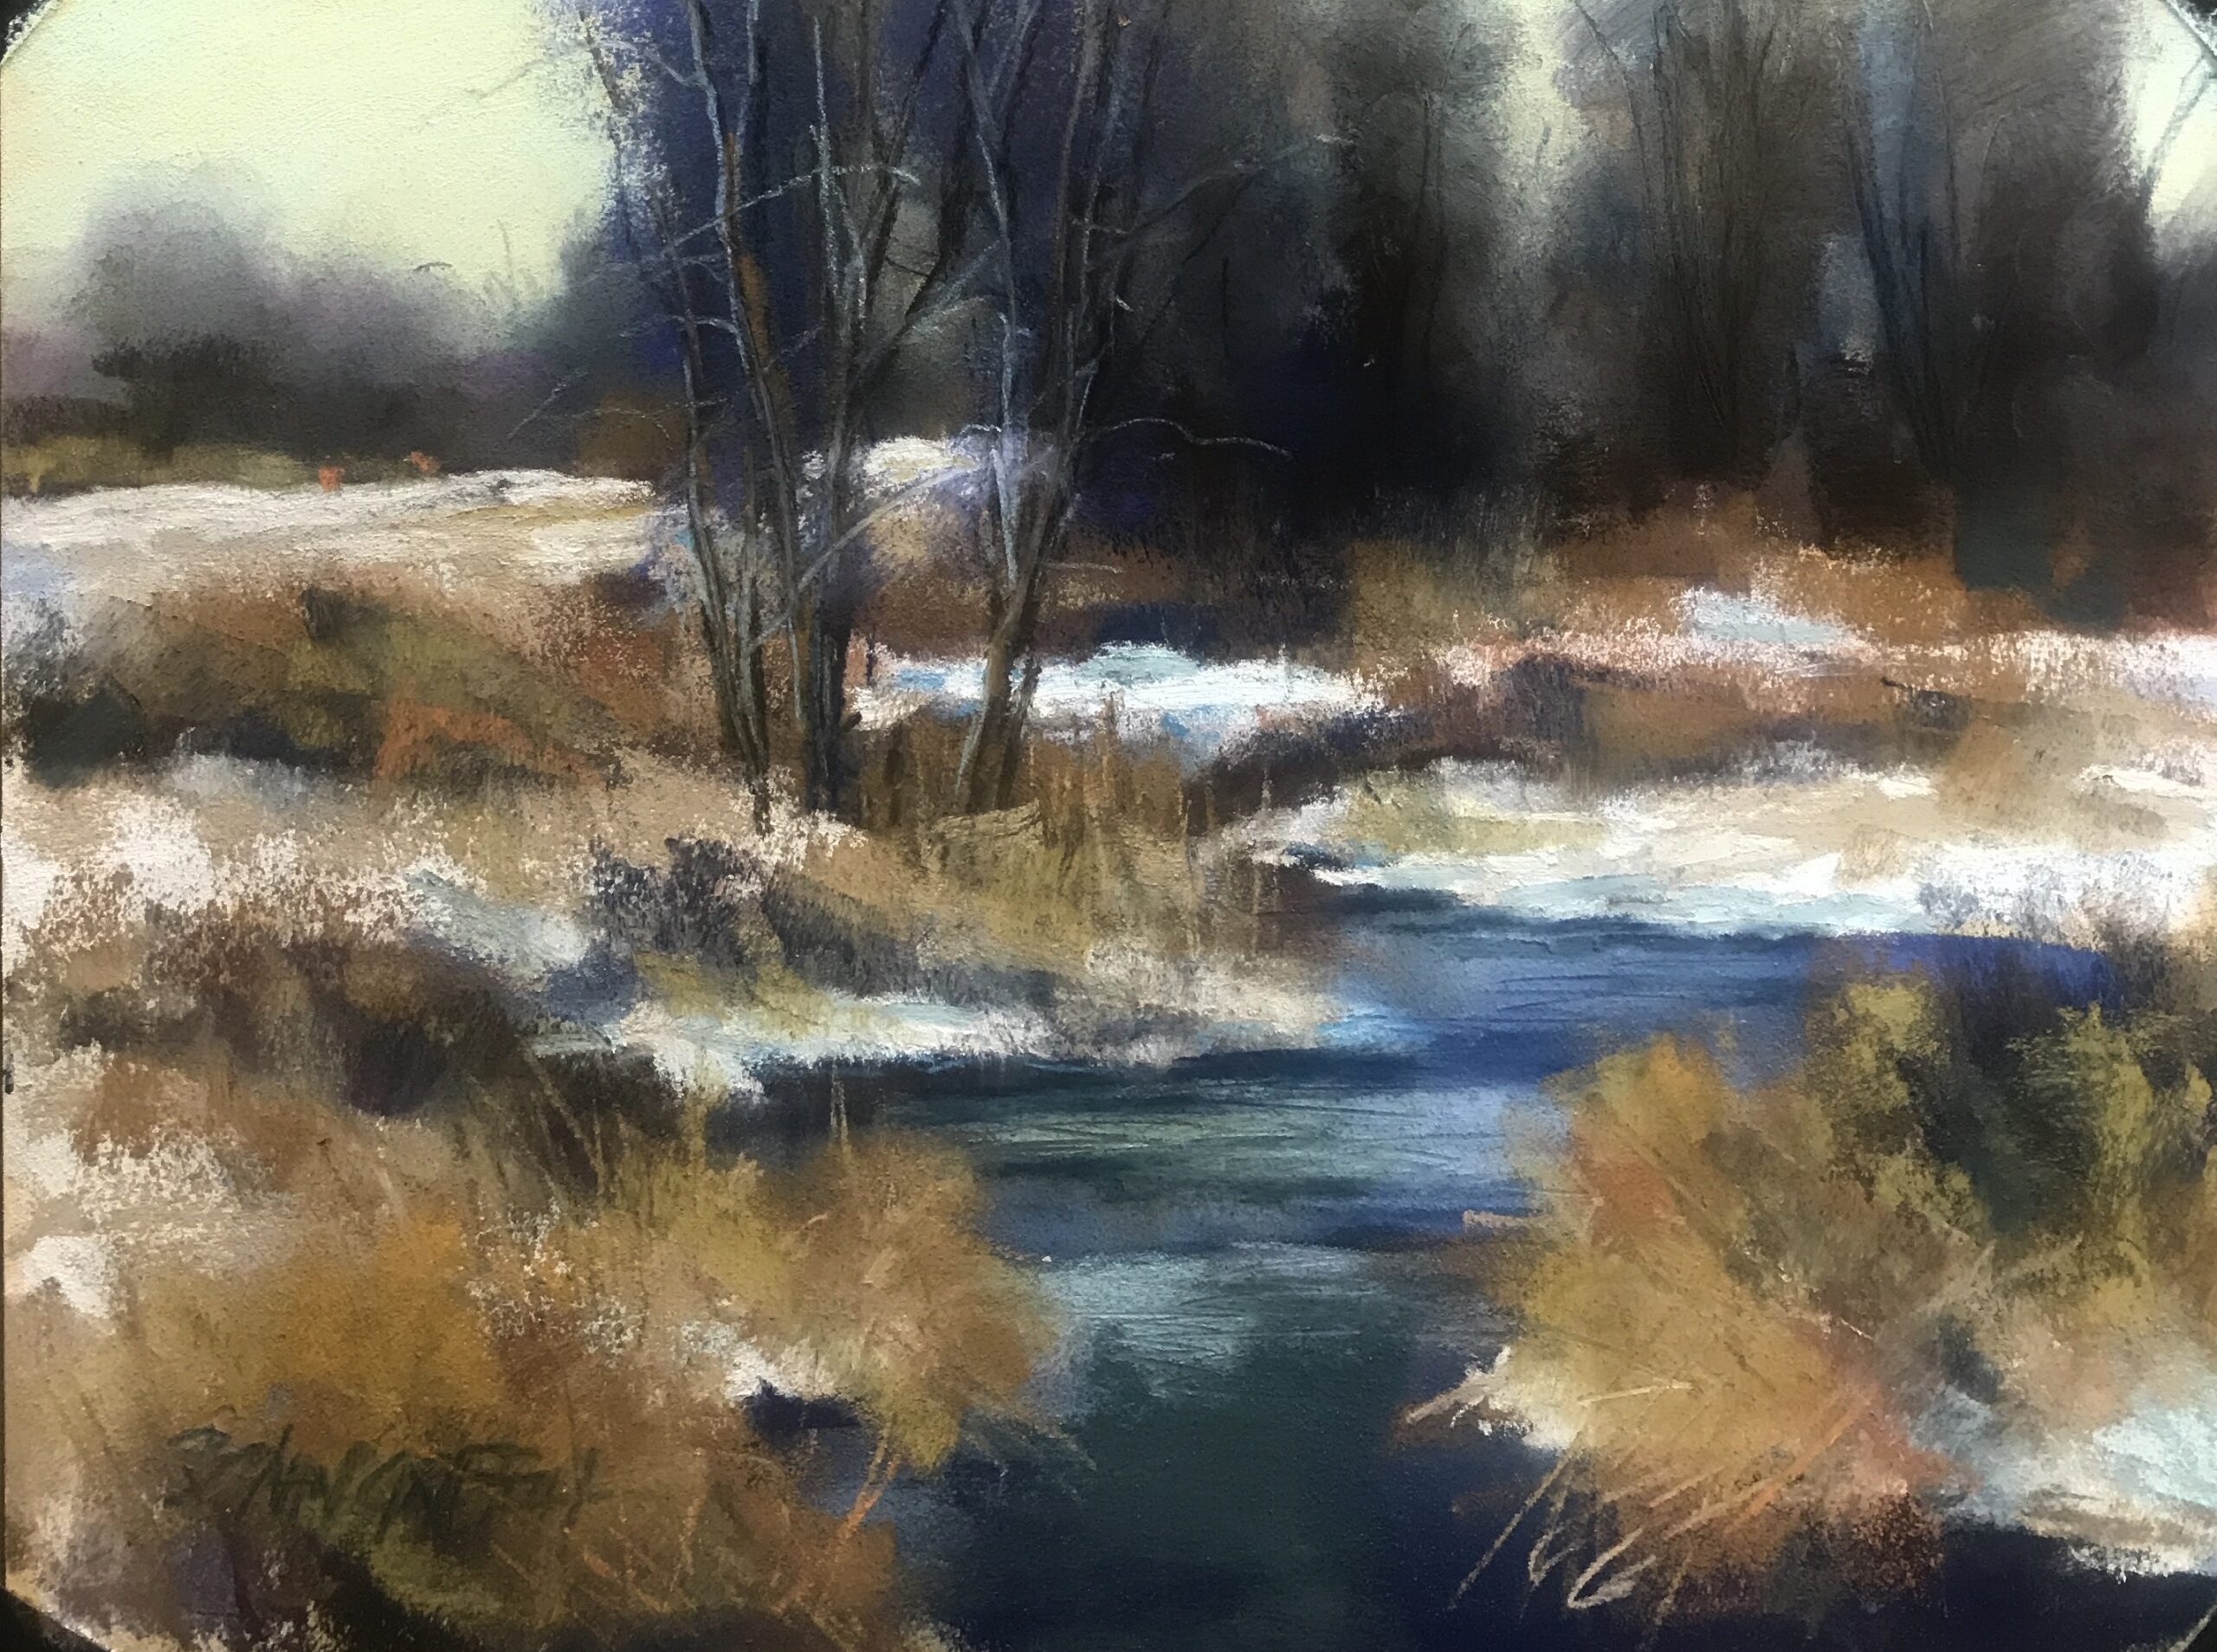 Bonnie Zahn Griffith, “River Dance,” 2022, pastel, 8 x 10 in., Available from Cawdry Gallery, Whitefish, MT, Plein air